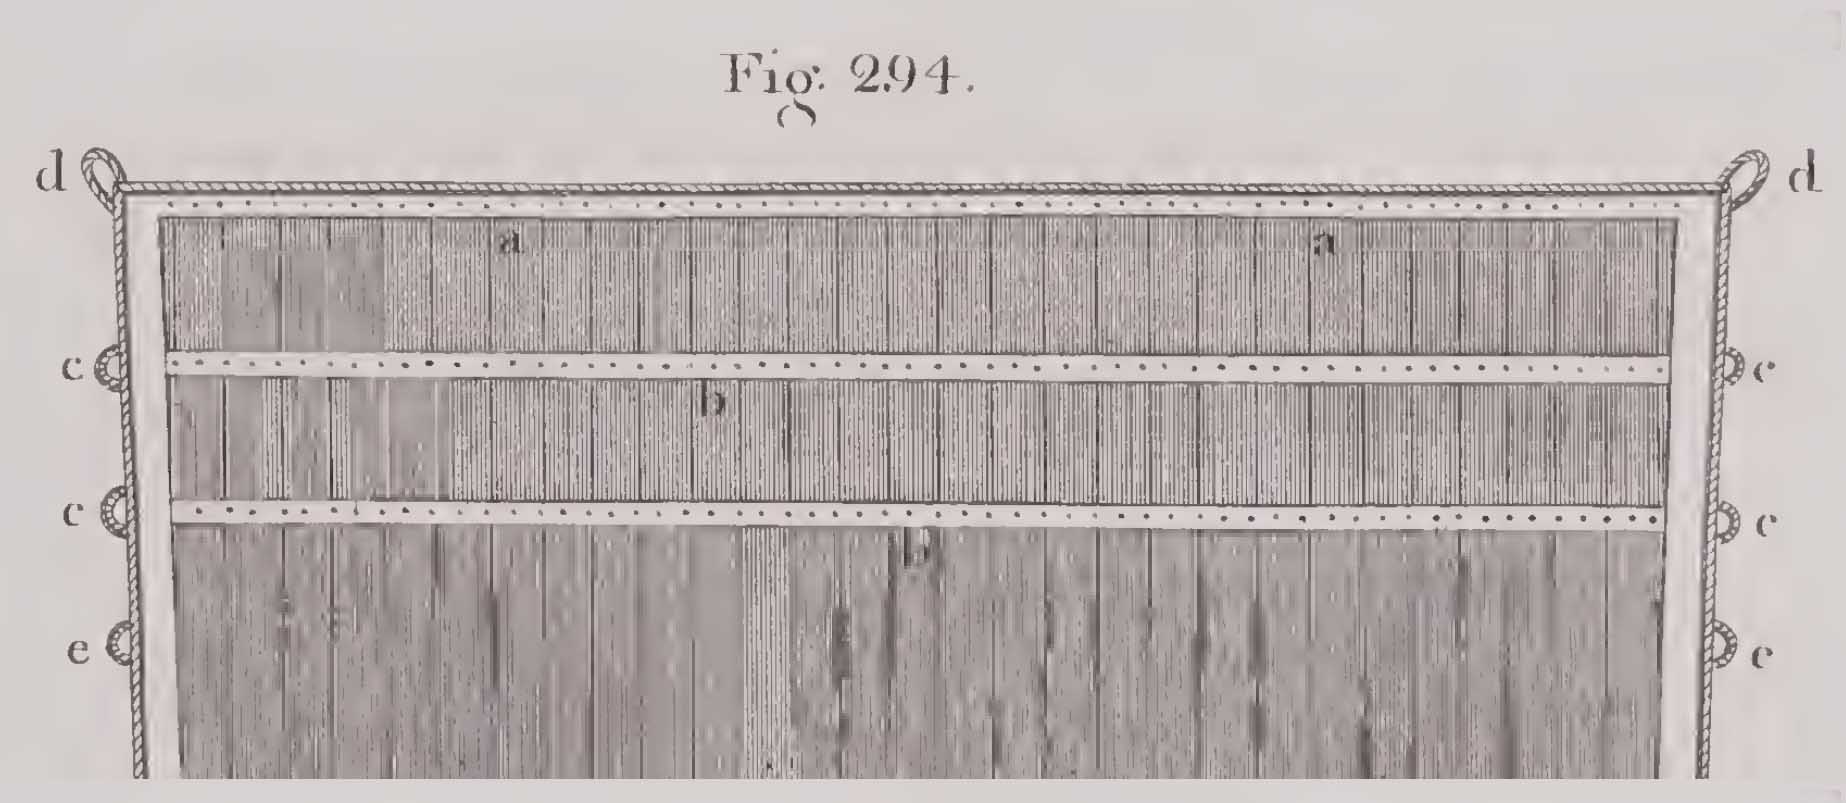 p50 fig 294 Fore Sail - The Young Sea Officer's Sheet Anchor Or A Key to the Leading of Rigging 1843.jpg